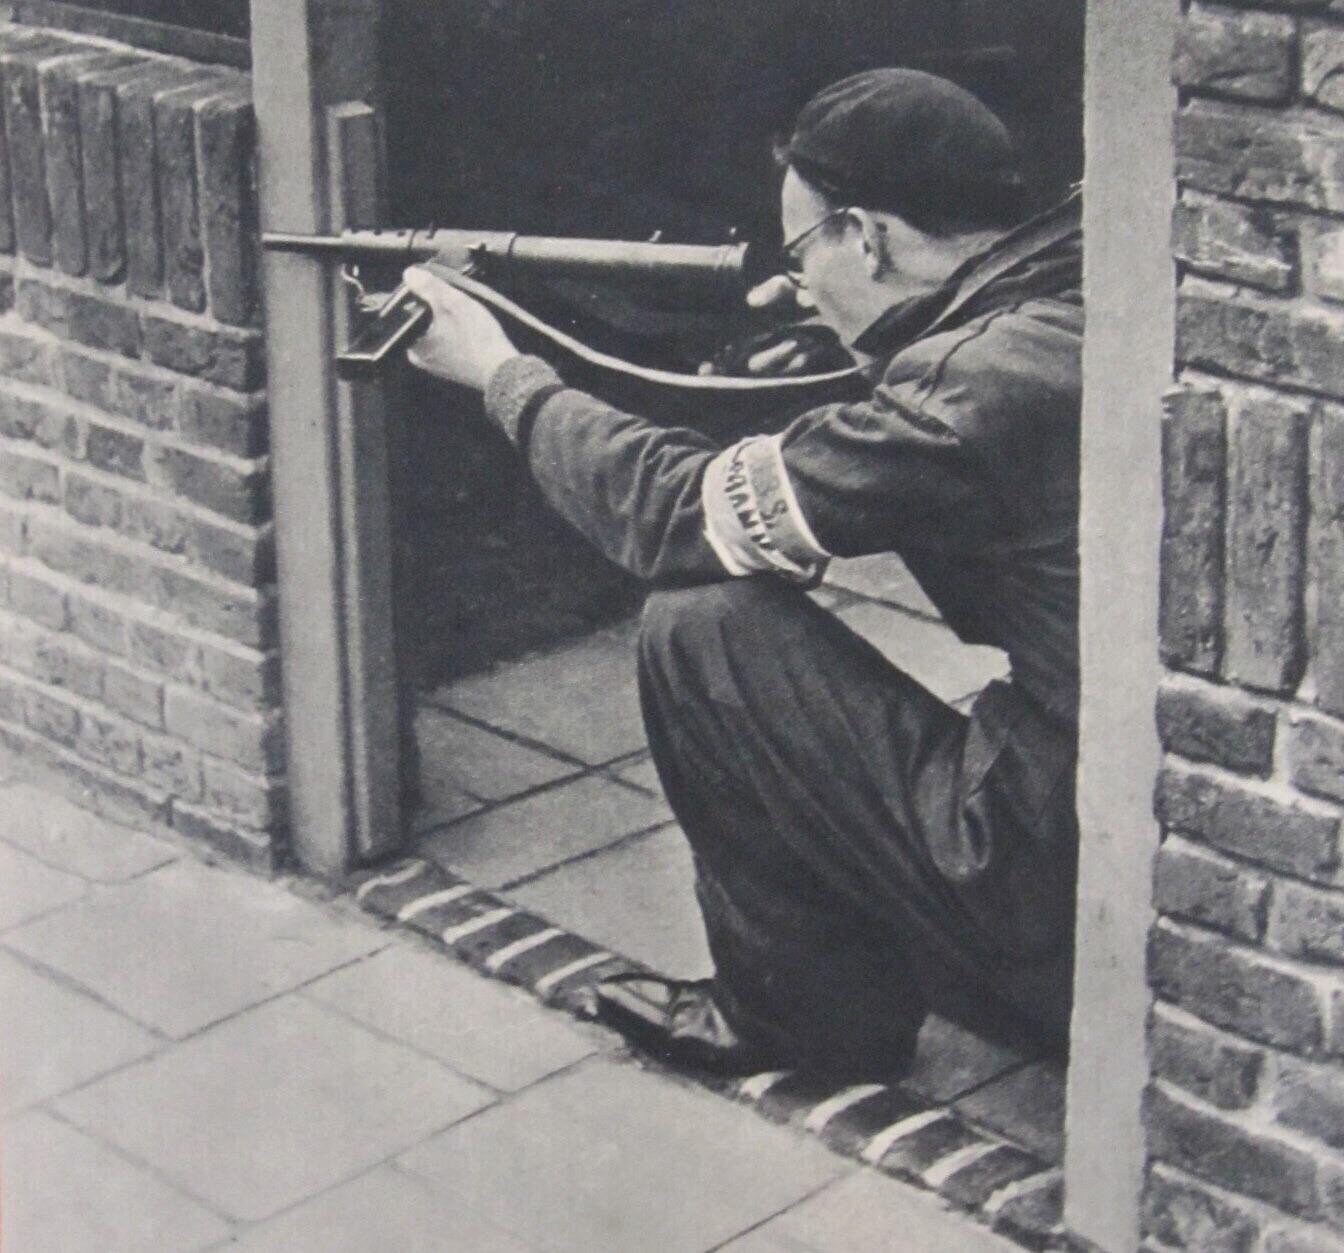 My grandfather, fighting for the Dutch resistance in Delft during WWII. He says he looks all cool but was actually shitting himself. ... and look at those shinie shoes!.jpg